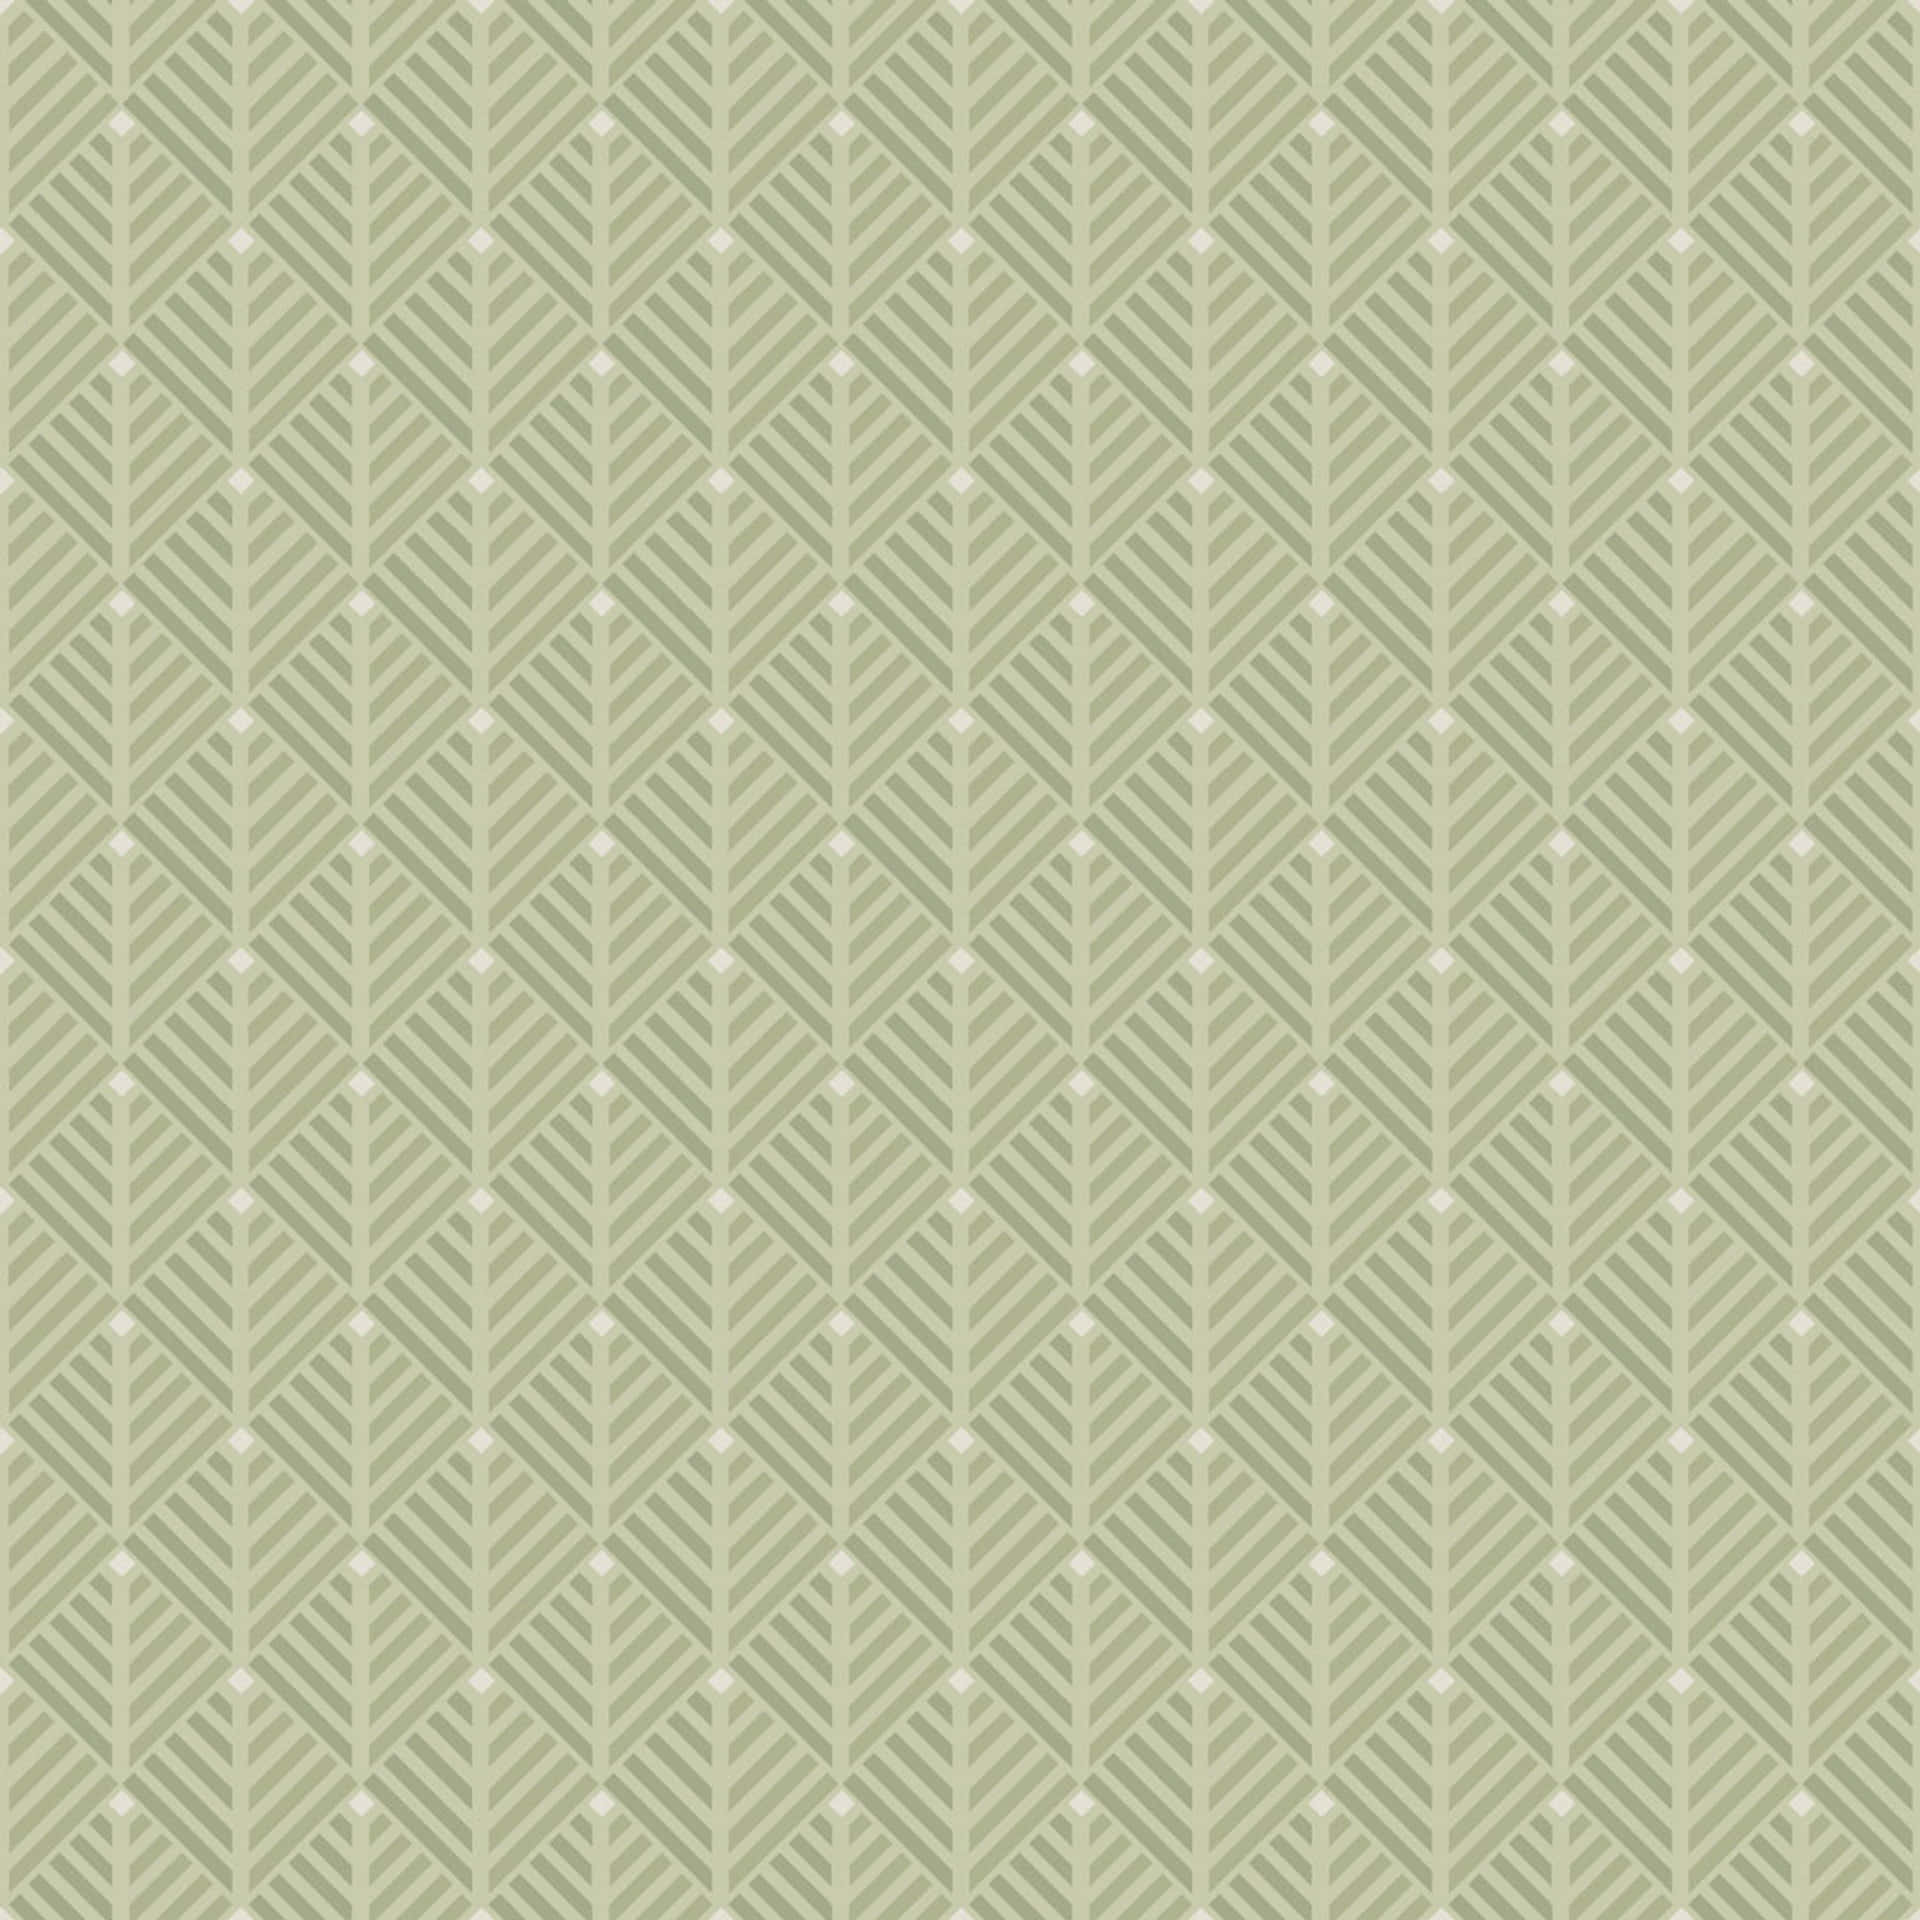 Abstract Olive Green Textured Background Wallpaper Wallpaper